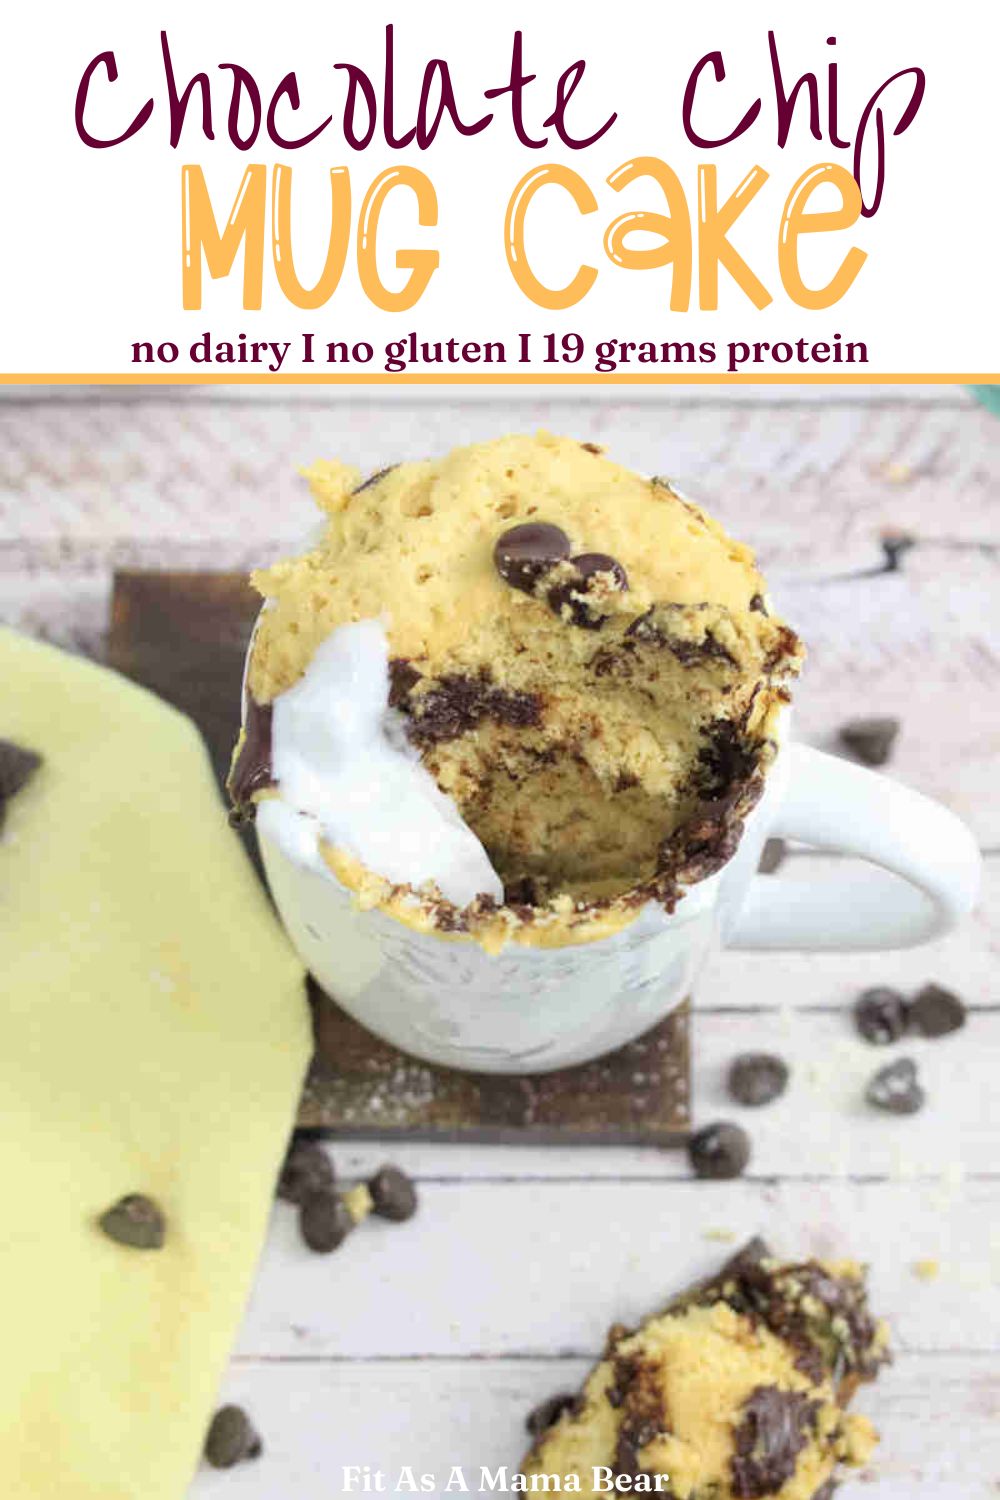 Chocolate chip mug cake with coconut cream in a white mug on a dark coasted with a yellow linen by it and text on the image.